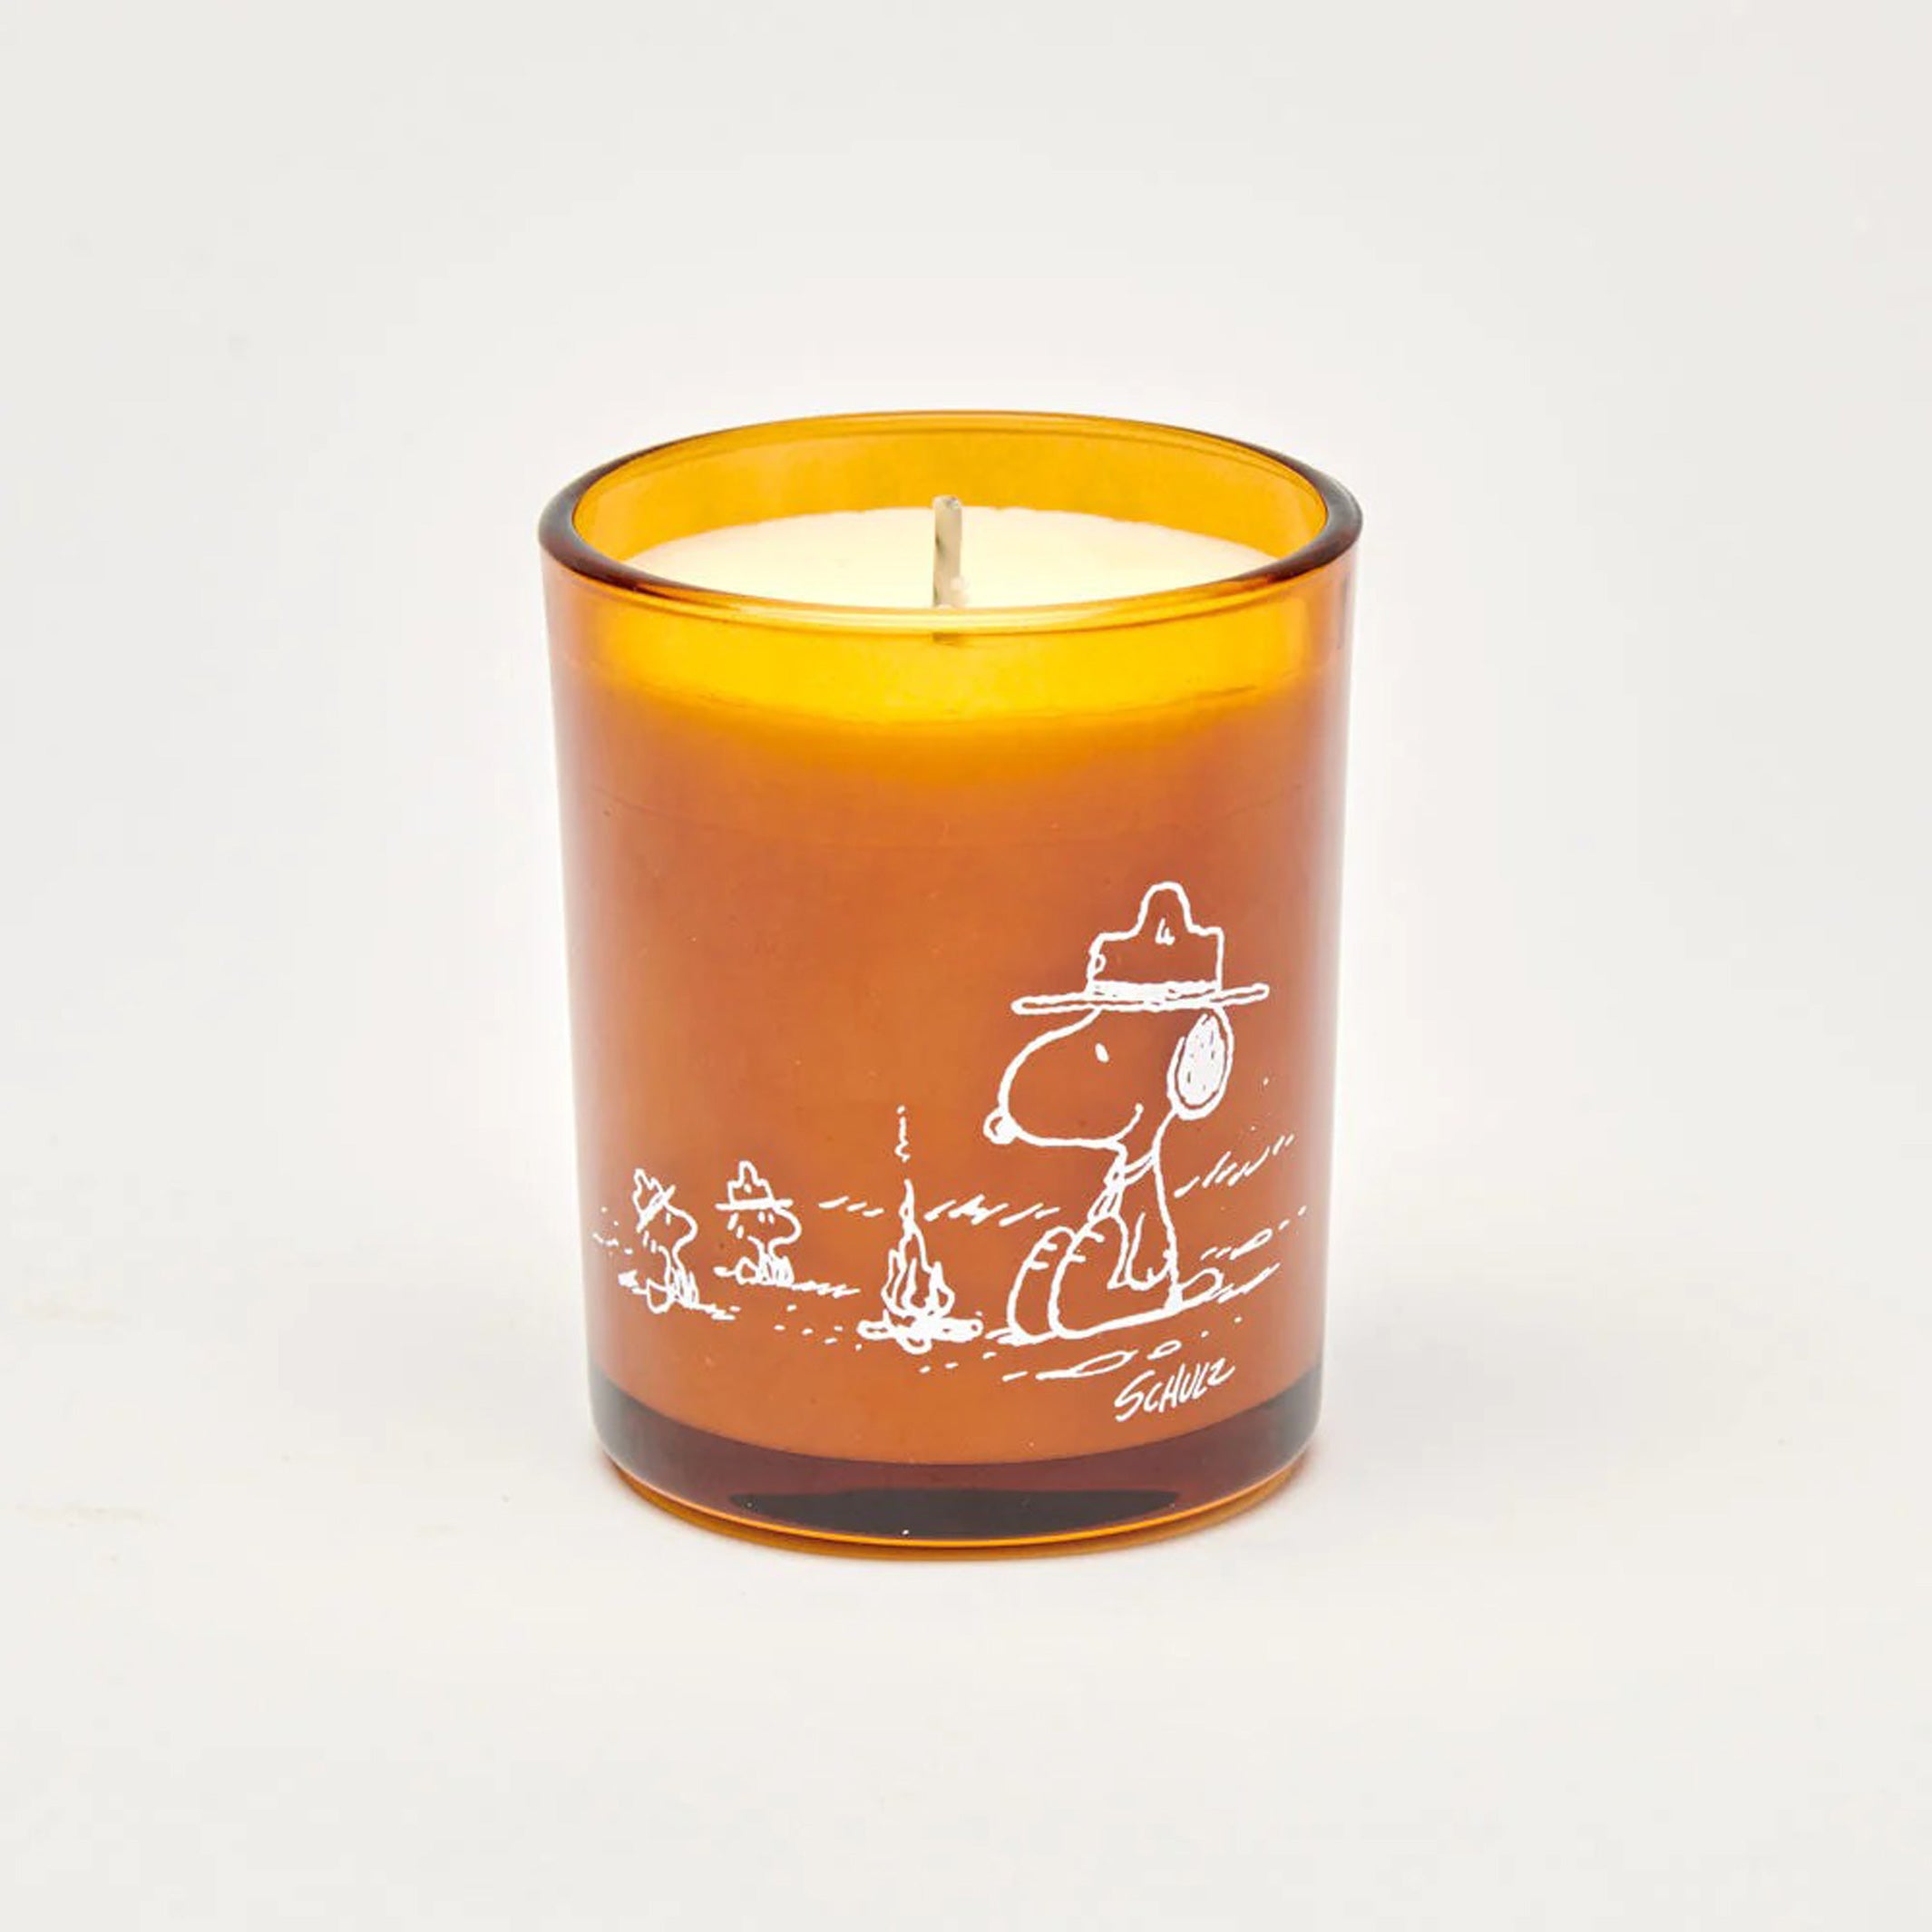 PEANUTS - CAMPFIRE CANDLE | Vegan, Vegetable WAX CANDLE | Cedar & Embers | Magpie